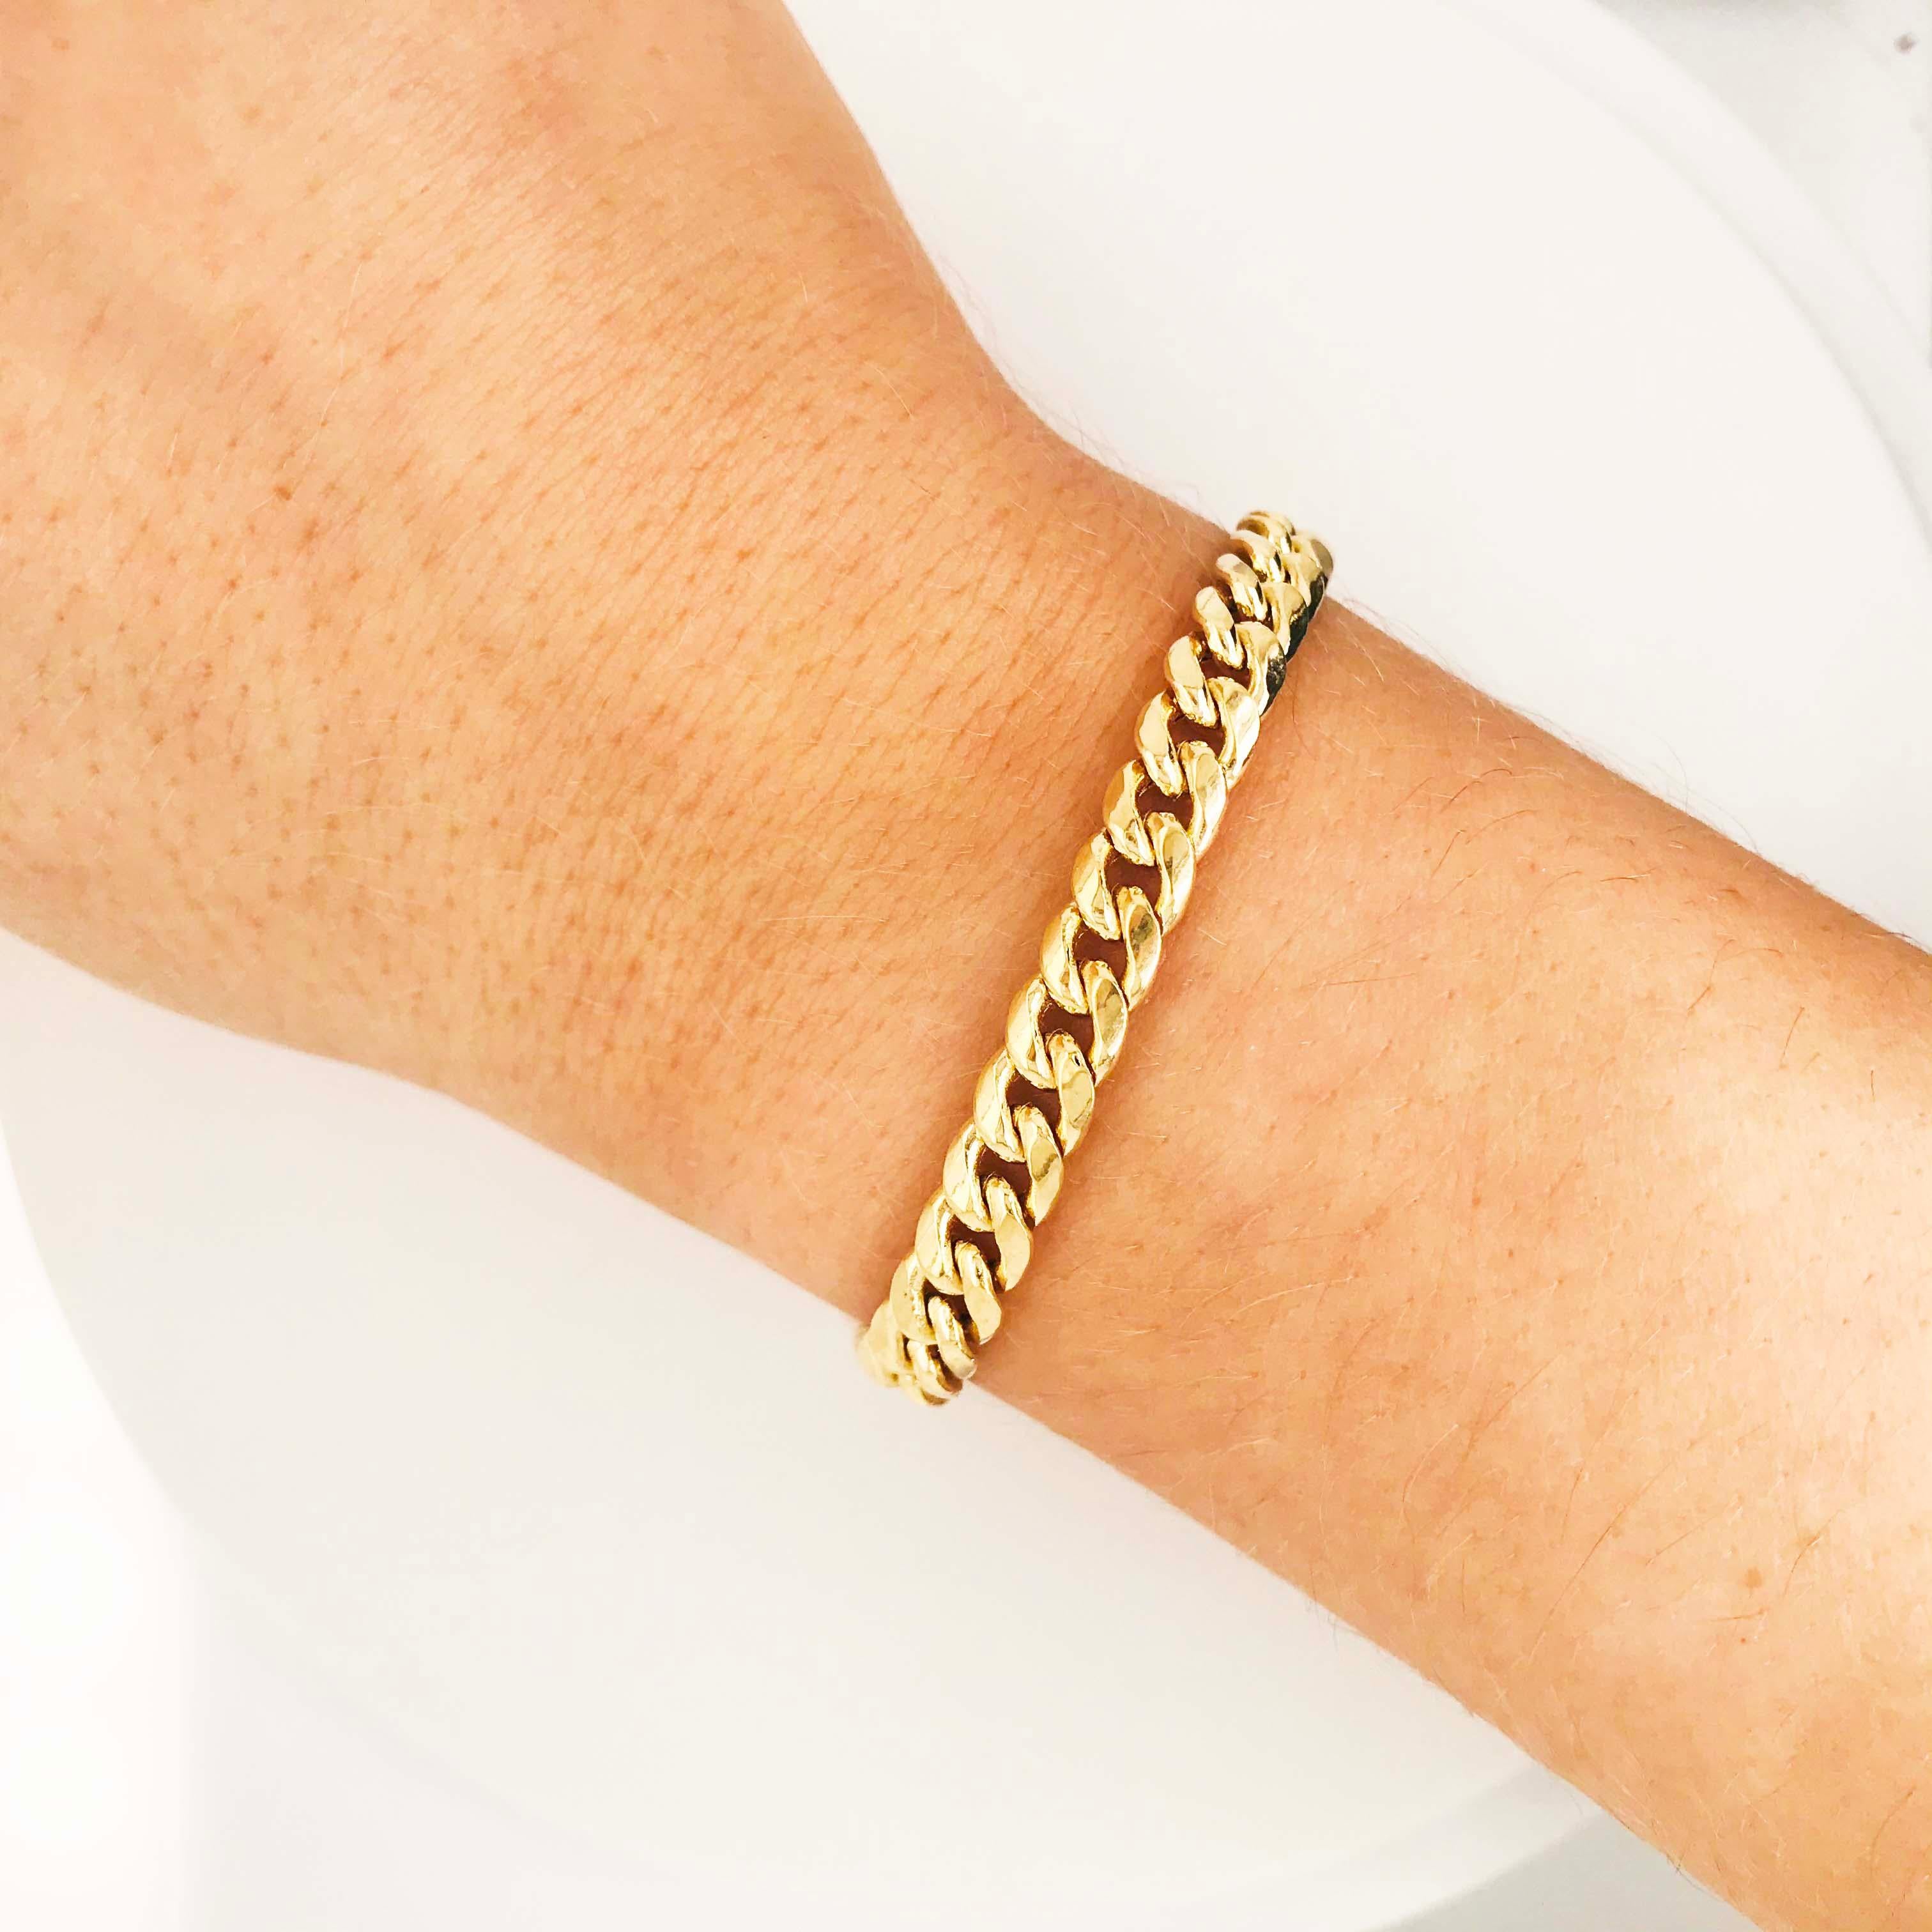 Miami cuban chains are a classic design! This Miami Cuban chain bracelet is a 6mm wide bracelet with a smooth, high polish finish. The links are individually hand-made and assembled together in a perfect design. This bracelet is 8 inches long, but